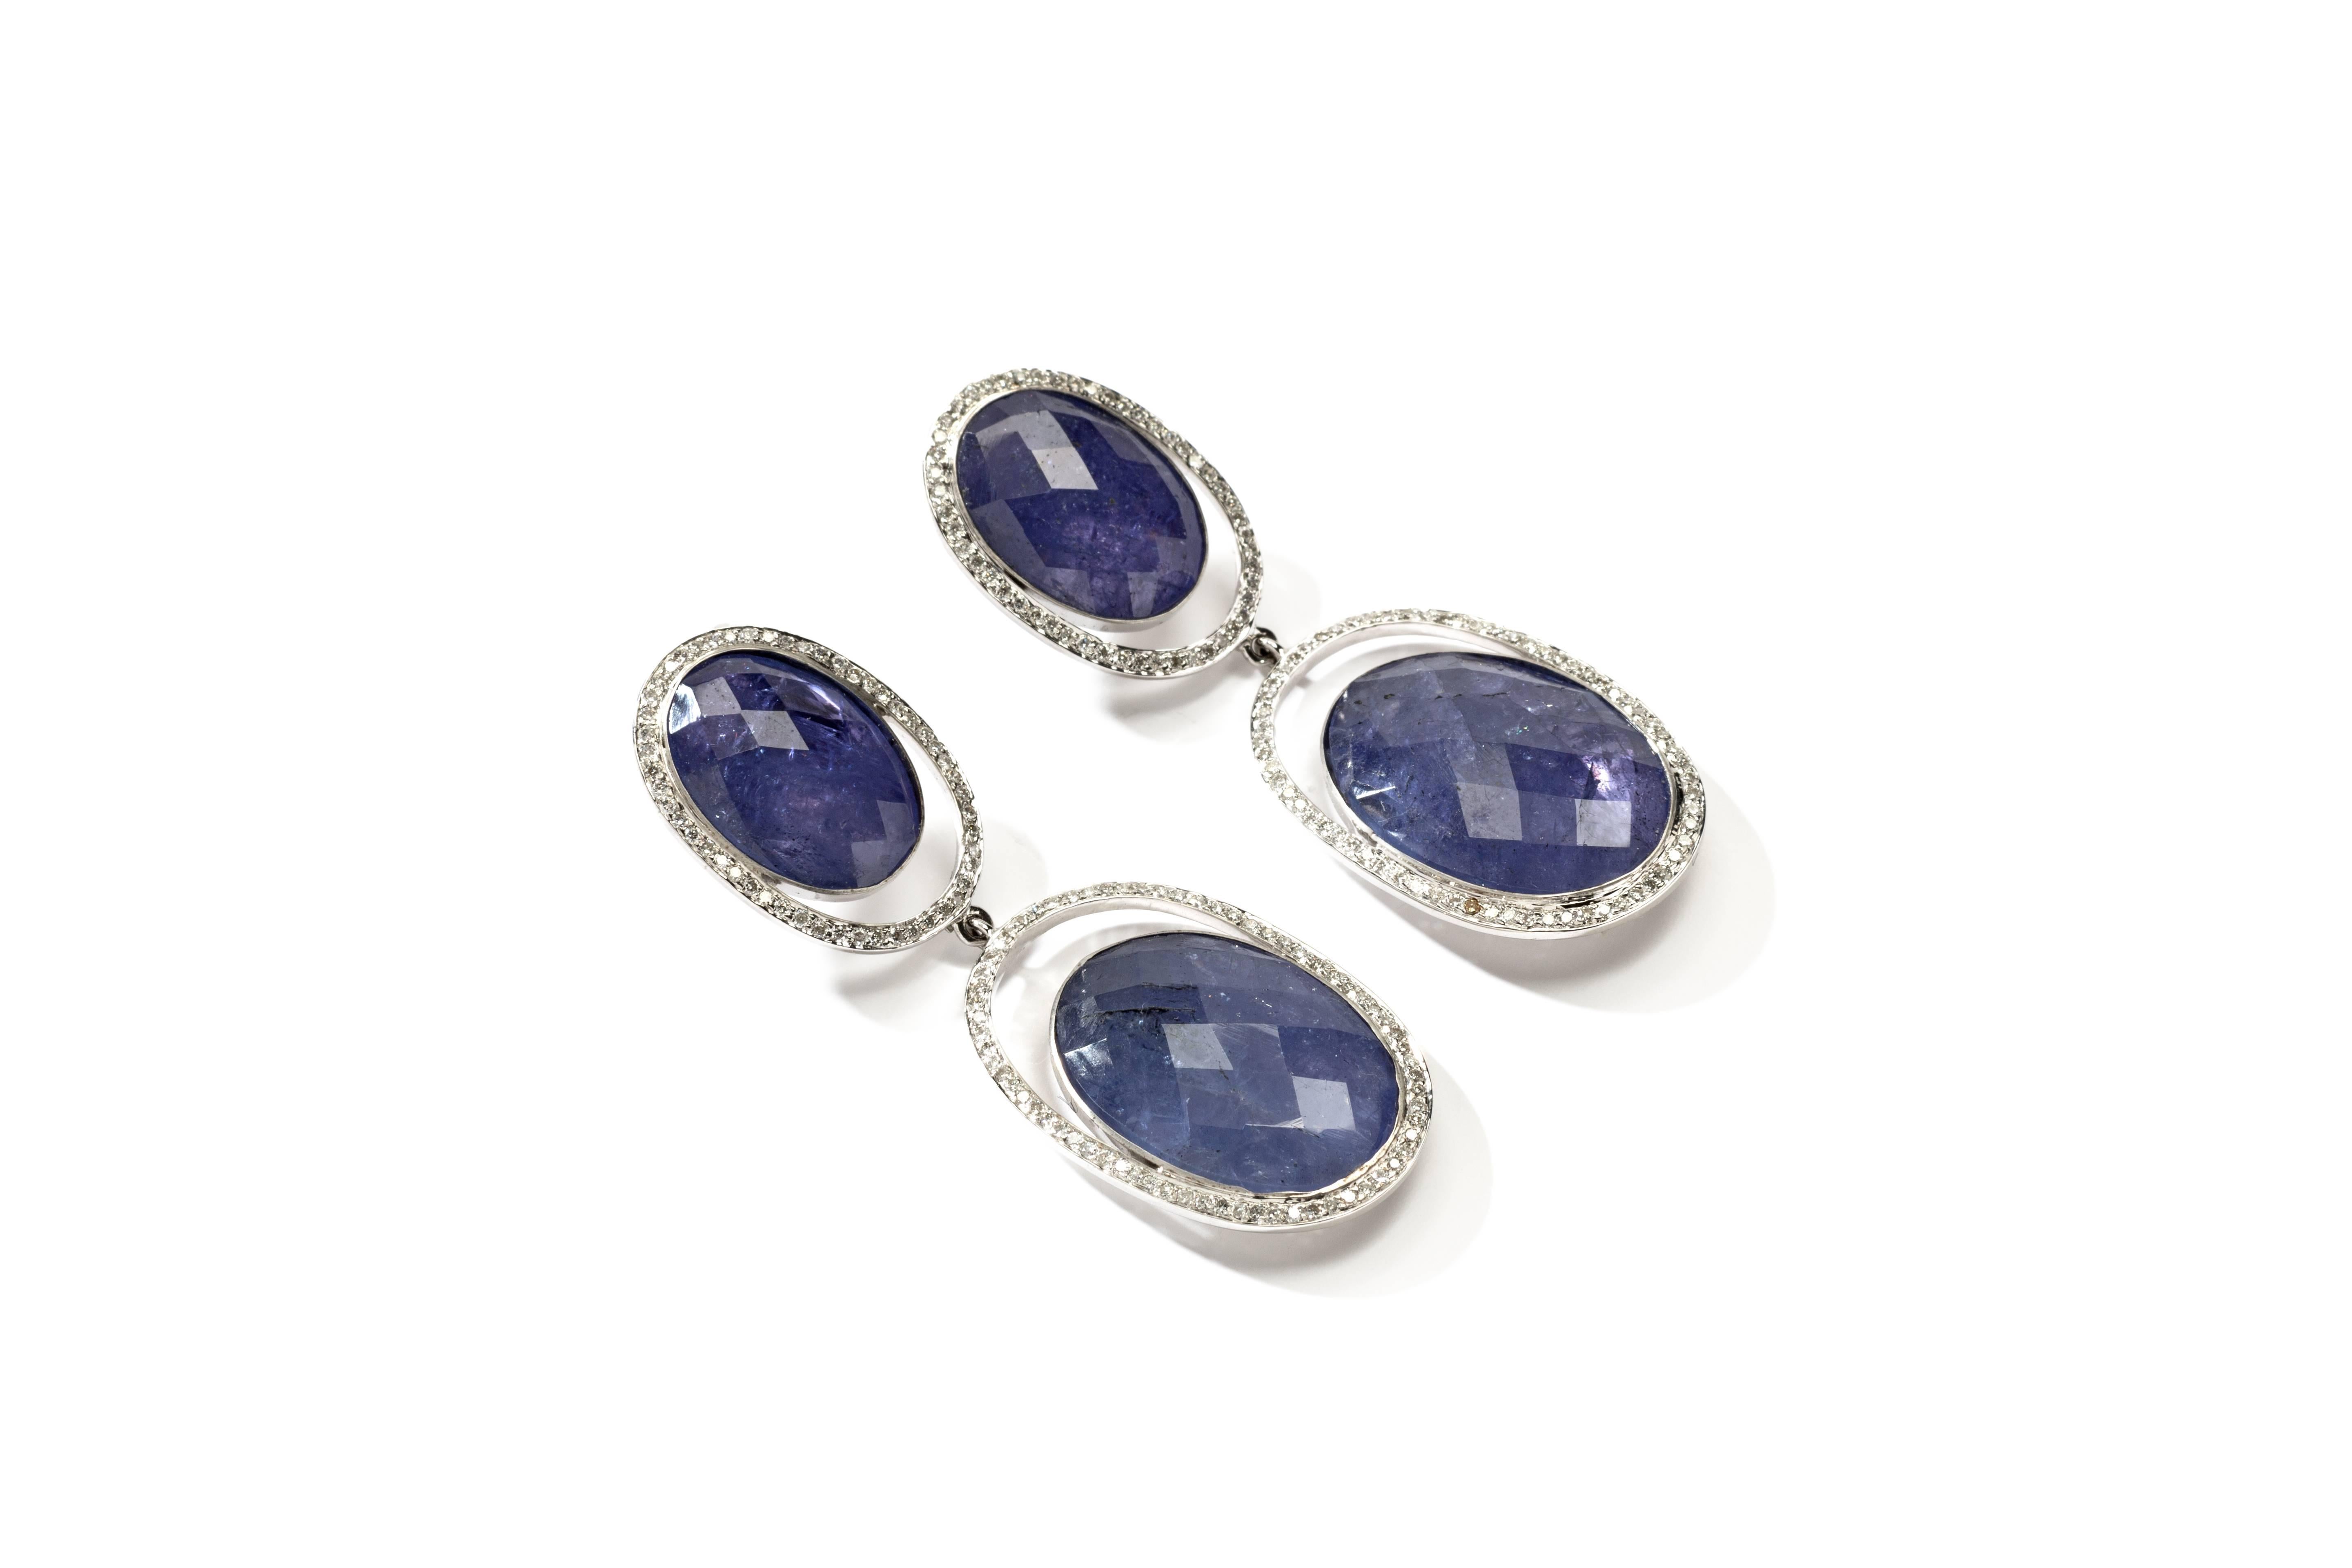 Europe, 2nd half of the 20th century. Set with 4 faceted tanzanite weighing approximately 32,90 ct. and 234 brilliant-cut diamonds with a total weight of circa 0.71 ct. Mounted in 18K white gold and marked with 750. Total weight: 16,2 g. Dimensions: